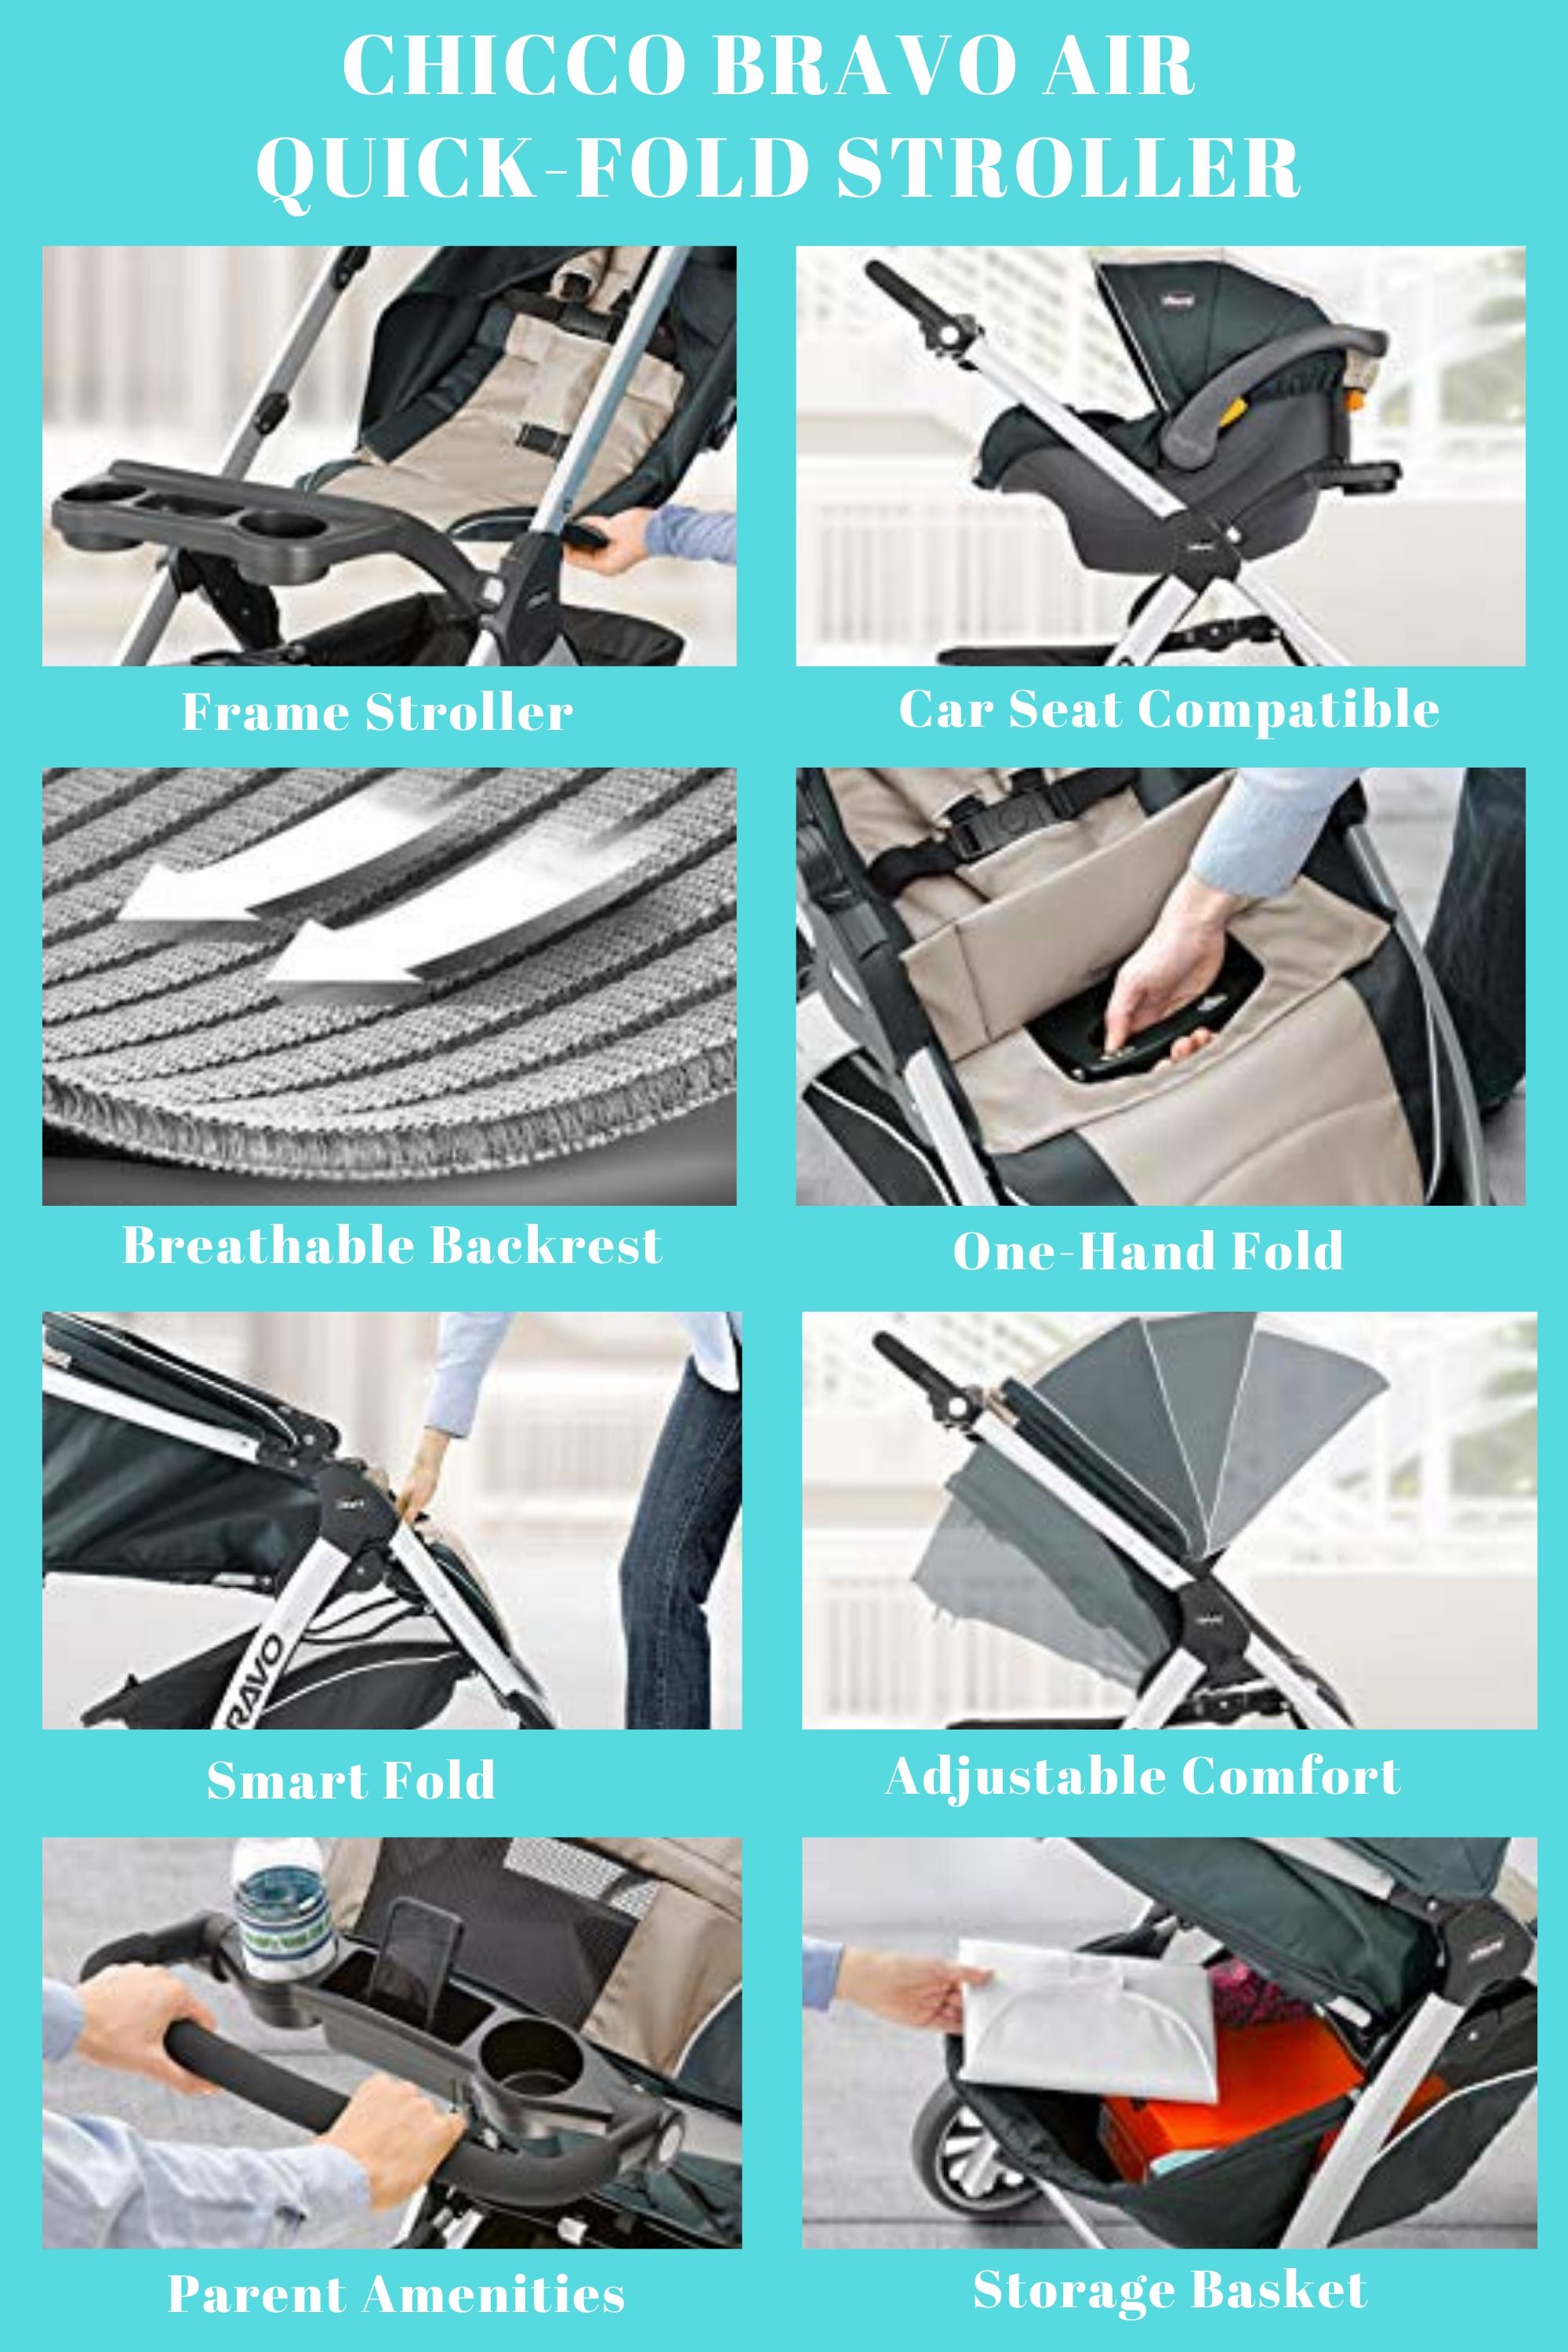 how to fold a chicco bravo stroller